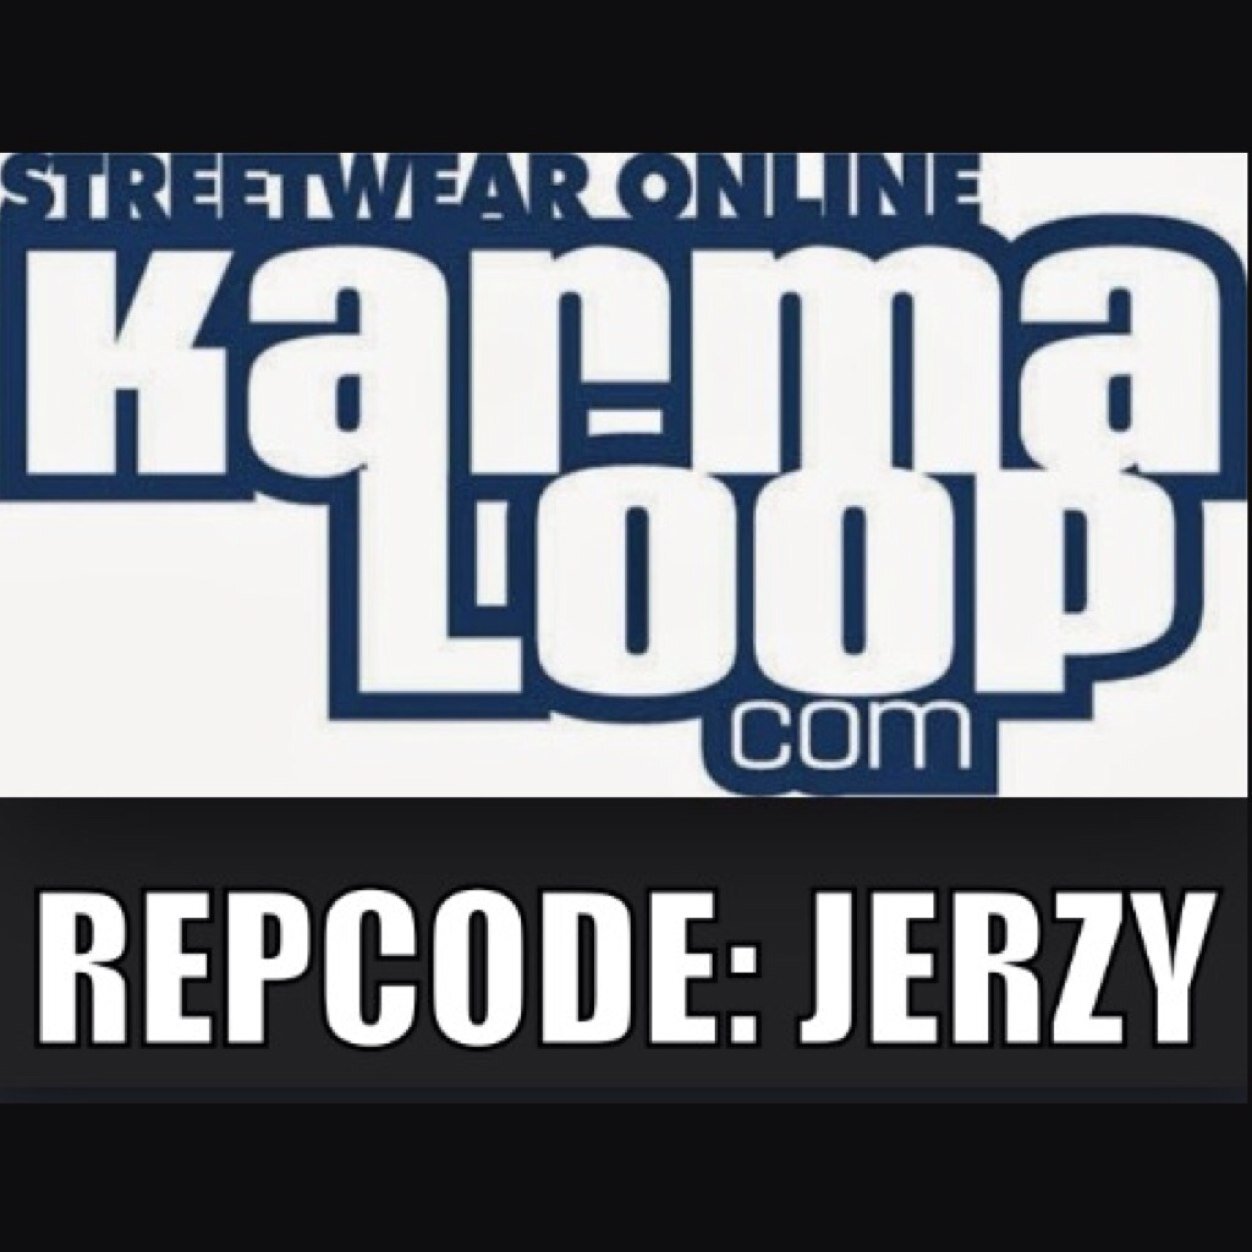 Use REP CODE: JERZY to get 20% OFF your first purchase on Karmaloop, Brick Harbor, MissKL, and Kazbah and 10% OFF on purchases after that!